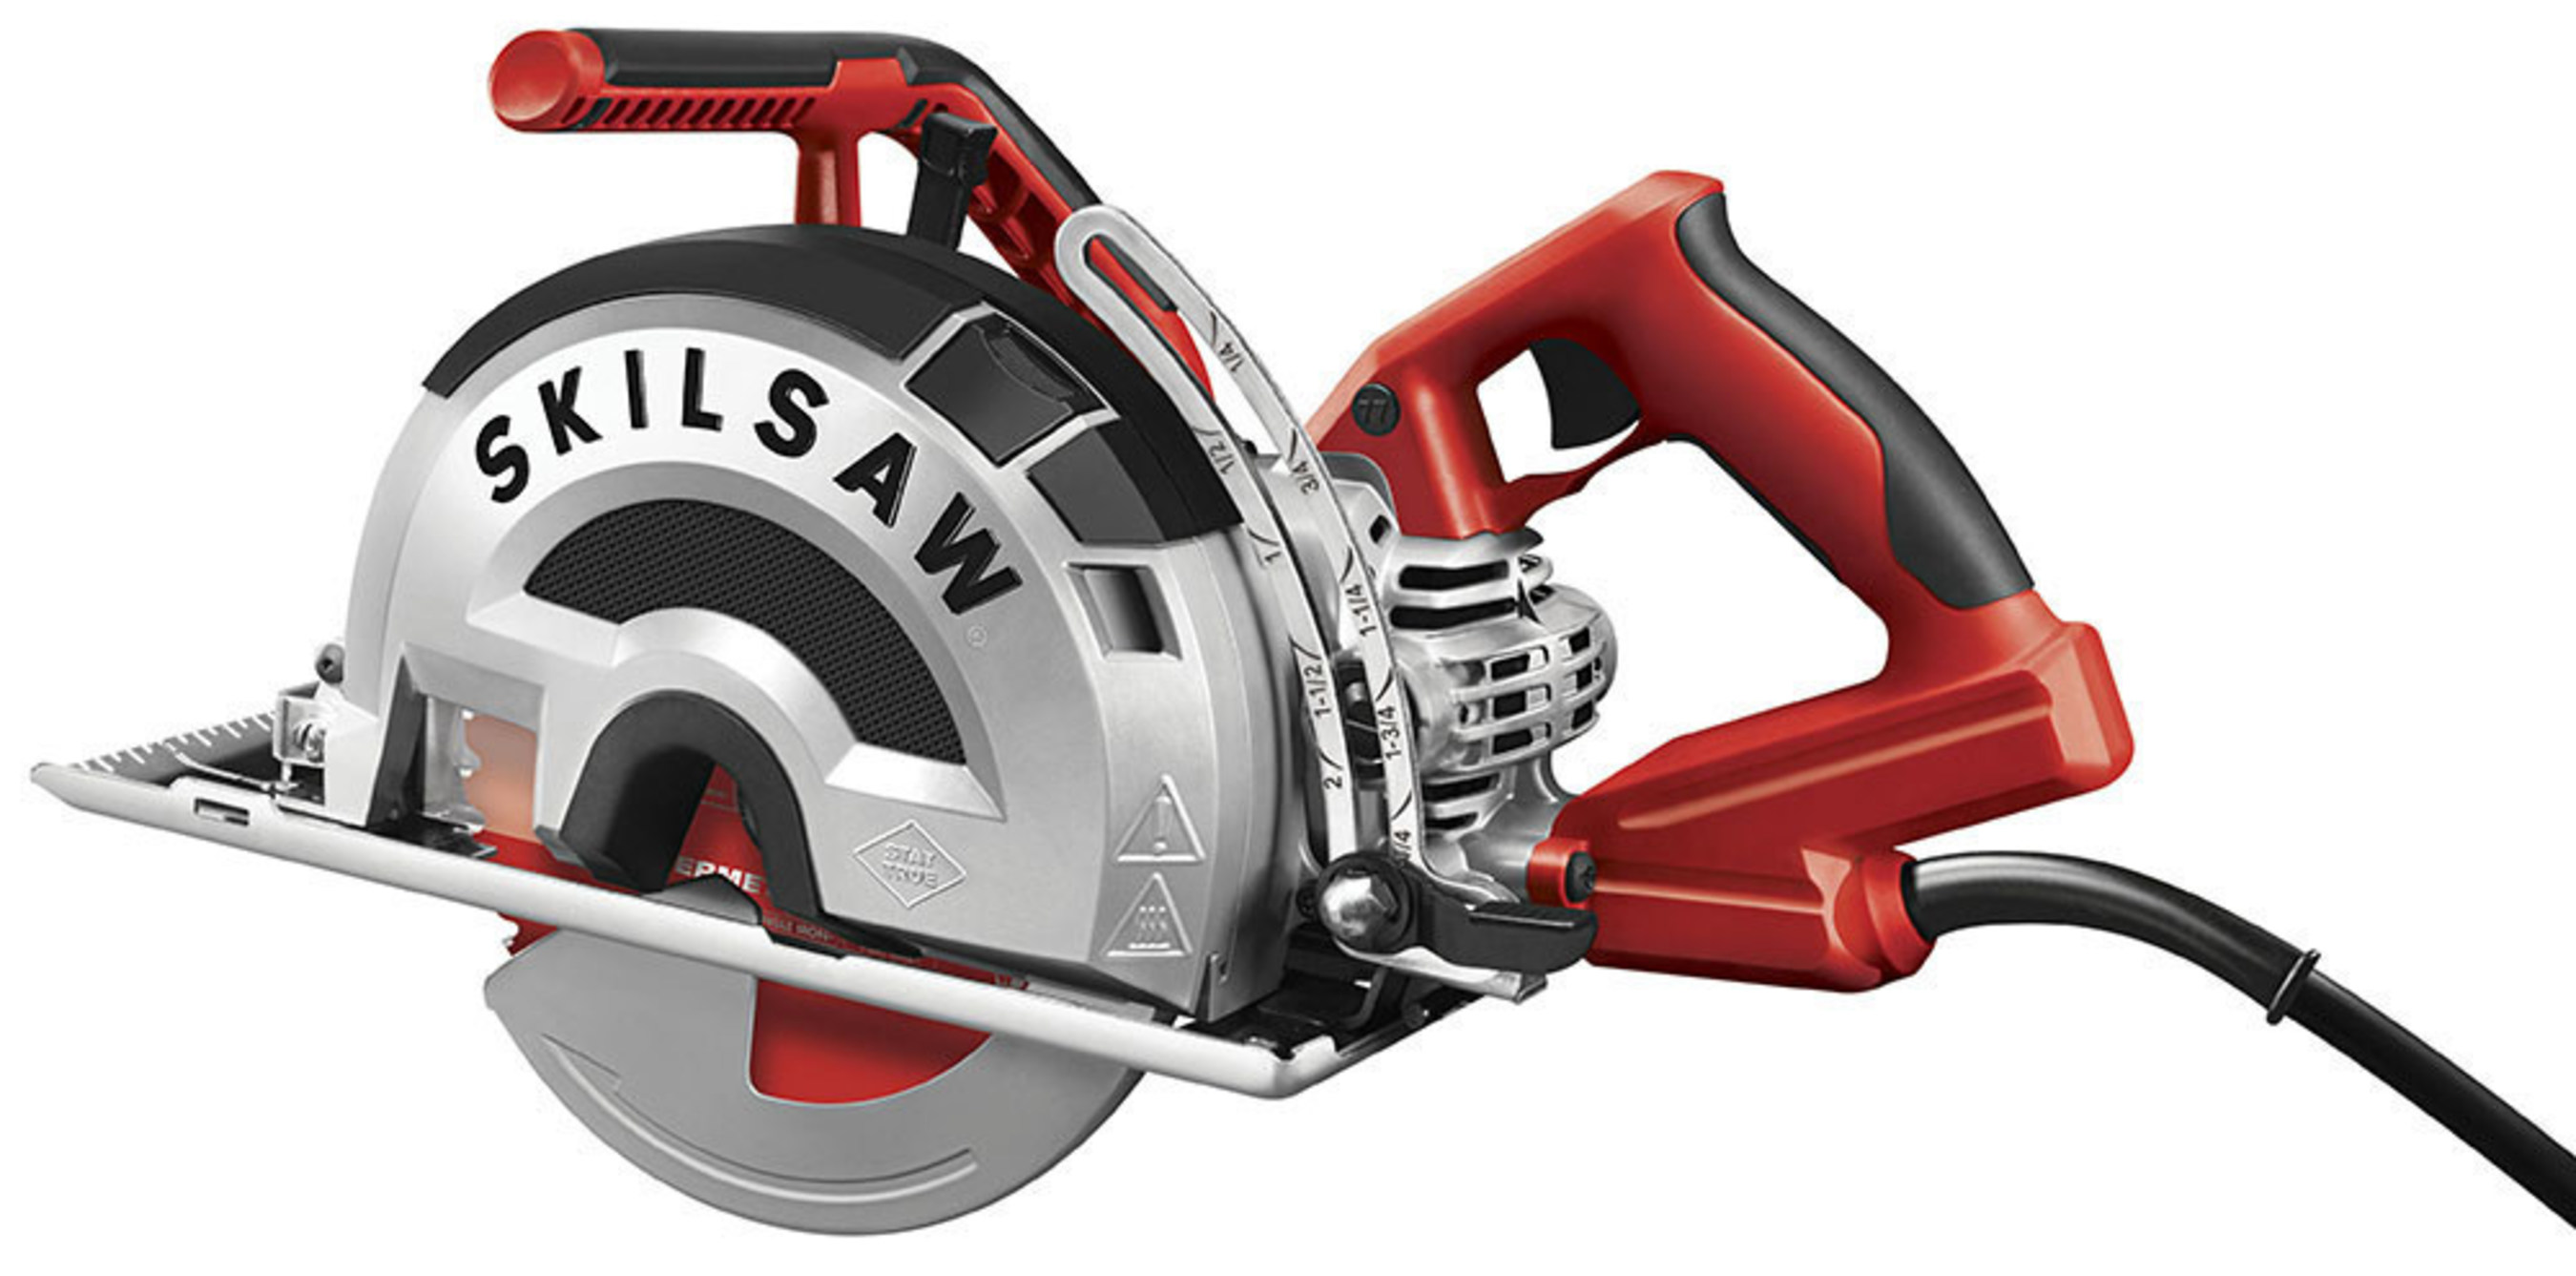 The SKILSAW 8-inch OUTLAW(TM) Worm Drive Saw for Metal, model SPT78MMC-22, is the first true Worm Drive specifically optimized to cut through metal. The Worm Drive design and left-side blade offers superior ergonomics and ease of use, and a best-in-class Dual-Field(TM) motor provides more power, precision and durability.